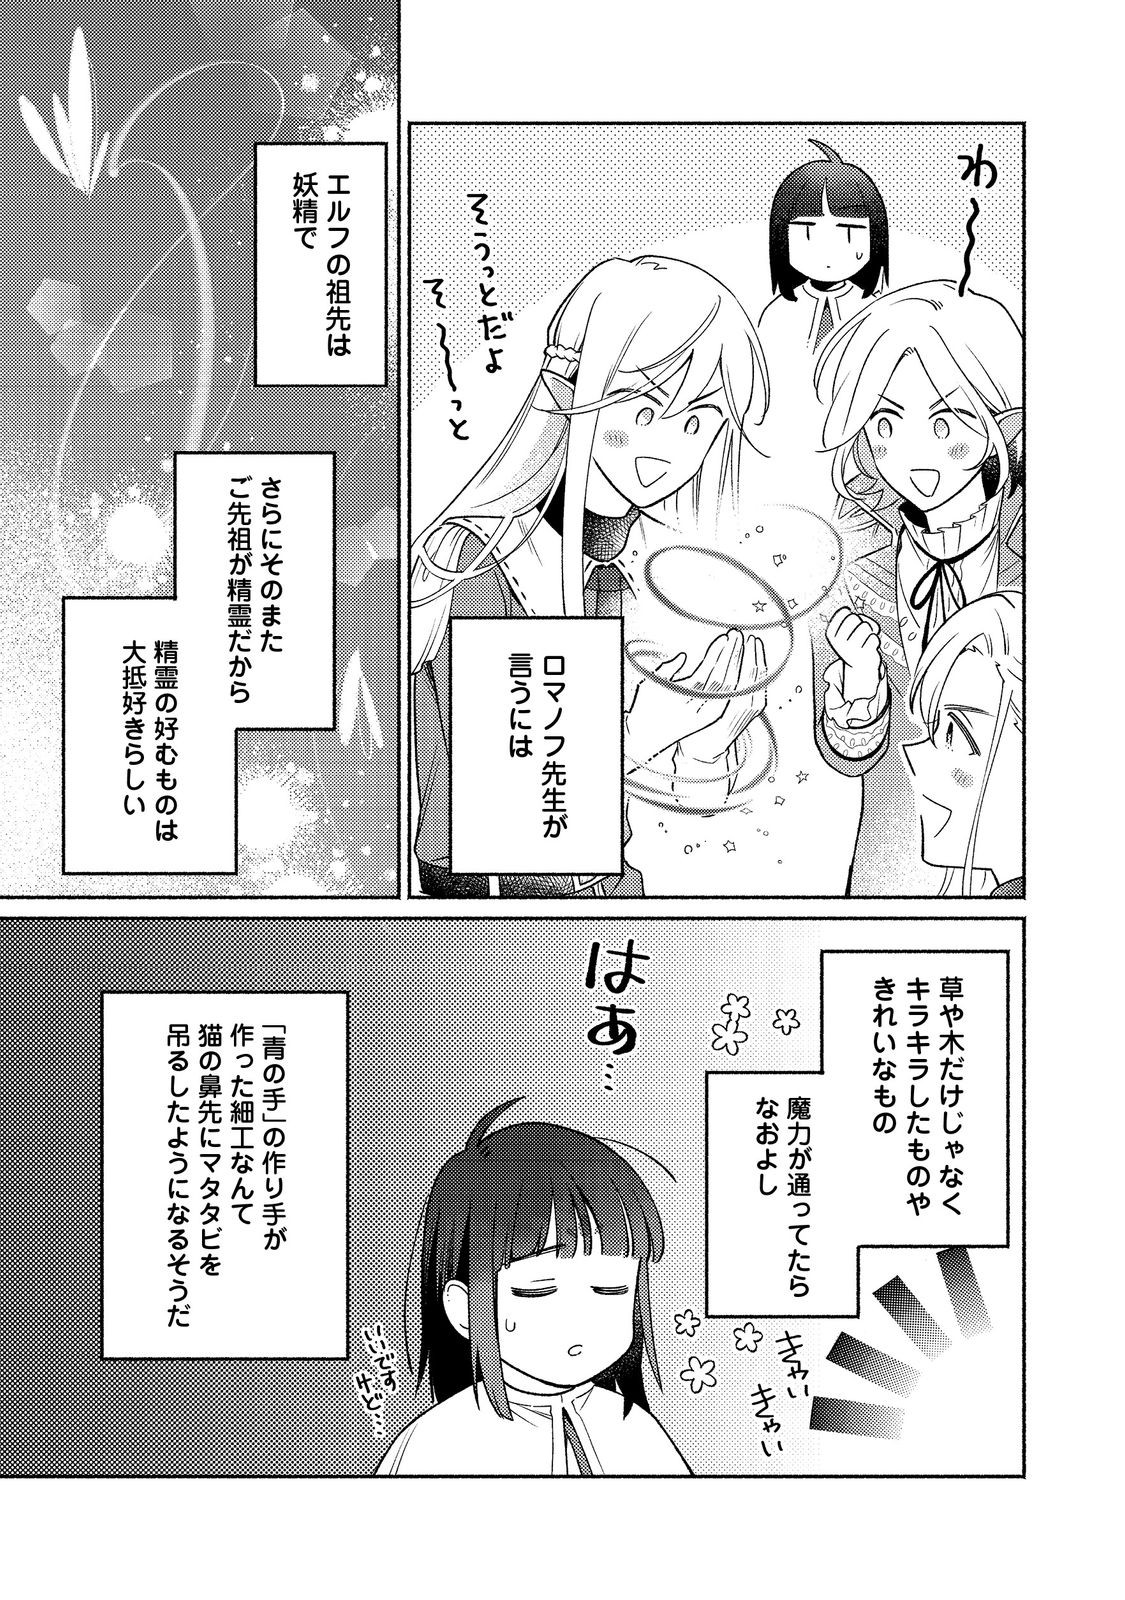 I’m the White Pig Nobleman 第21.1話 - Page 11